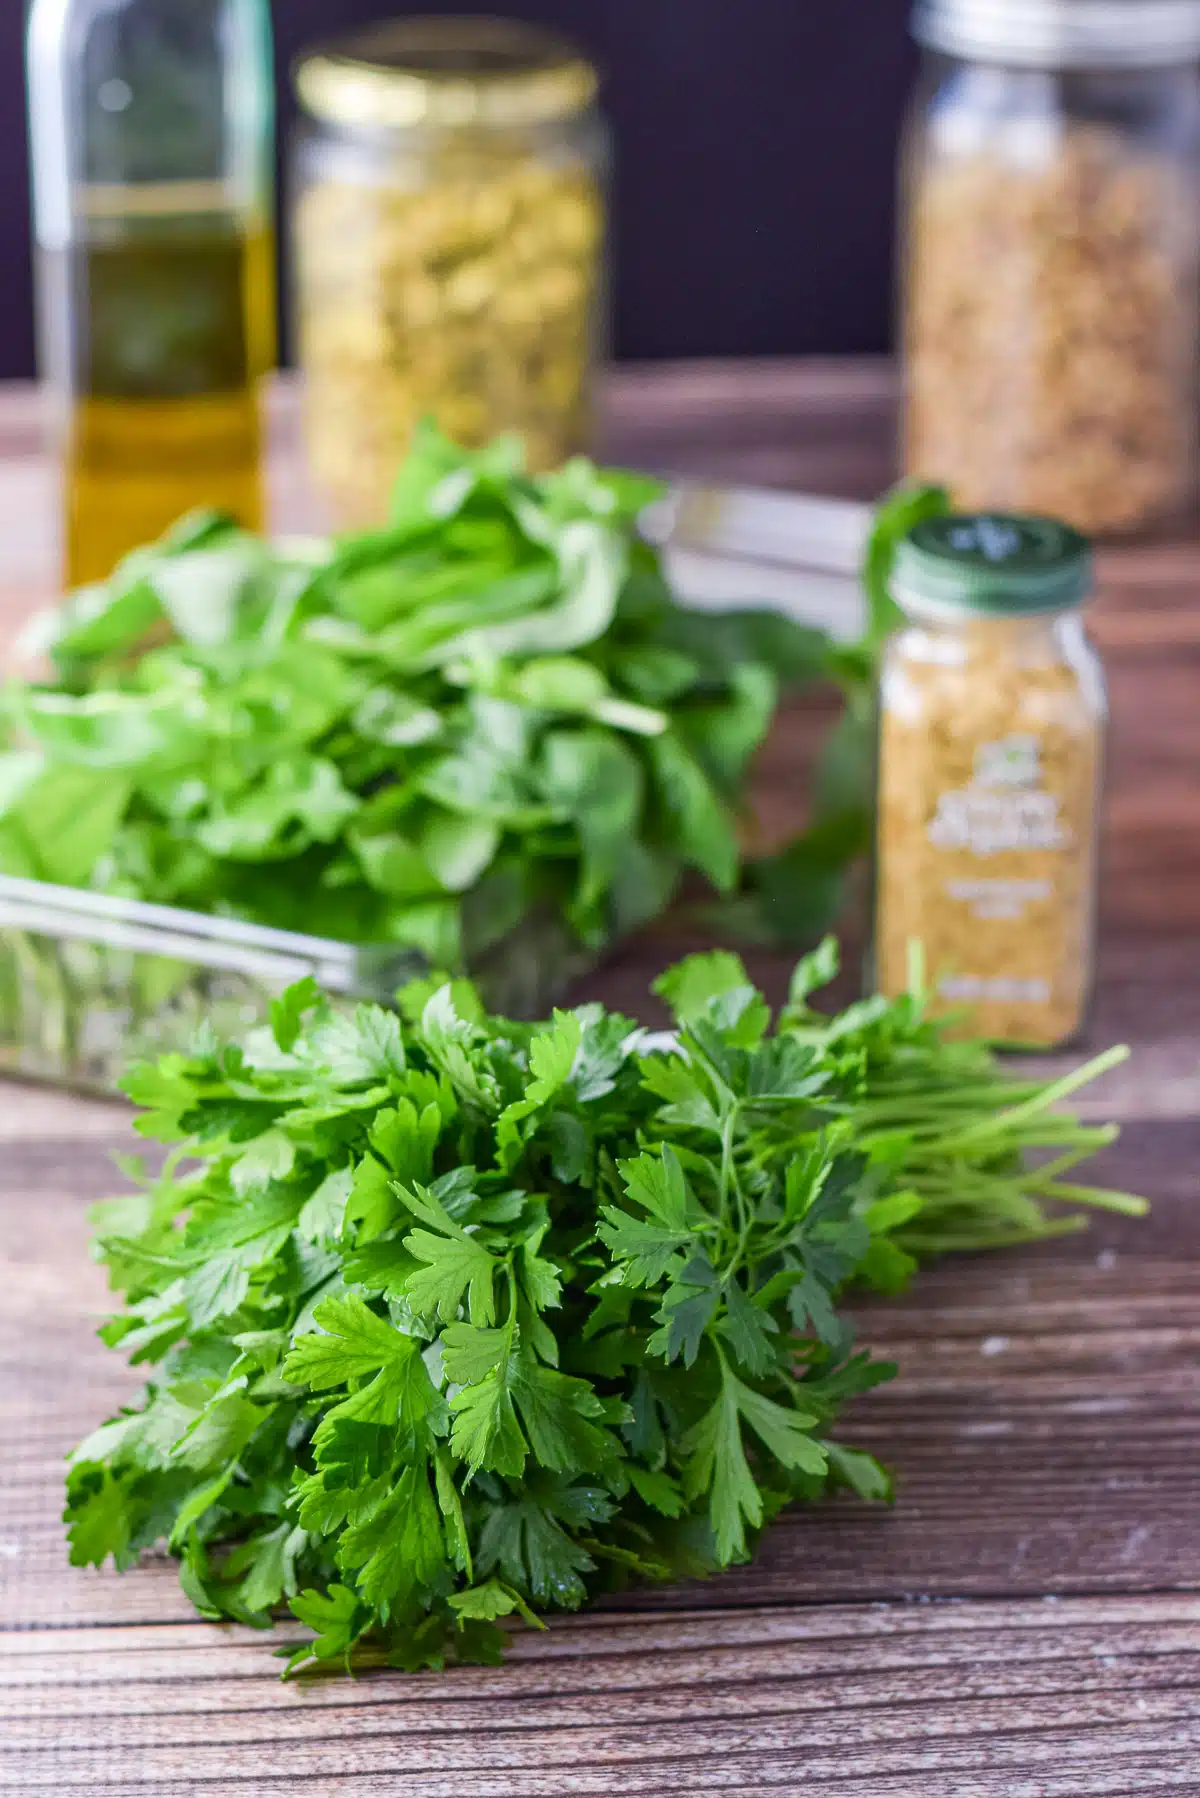 Fresh parsley, basil, nutritional yeast, pistachios, and oil on the table